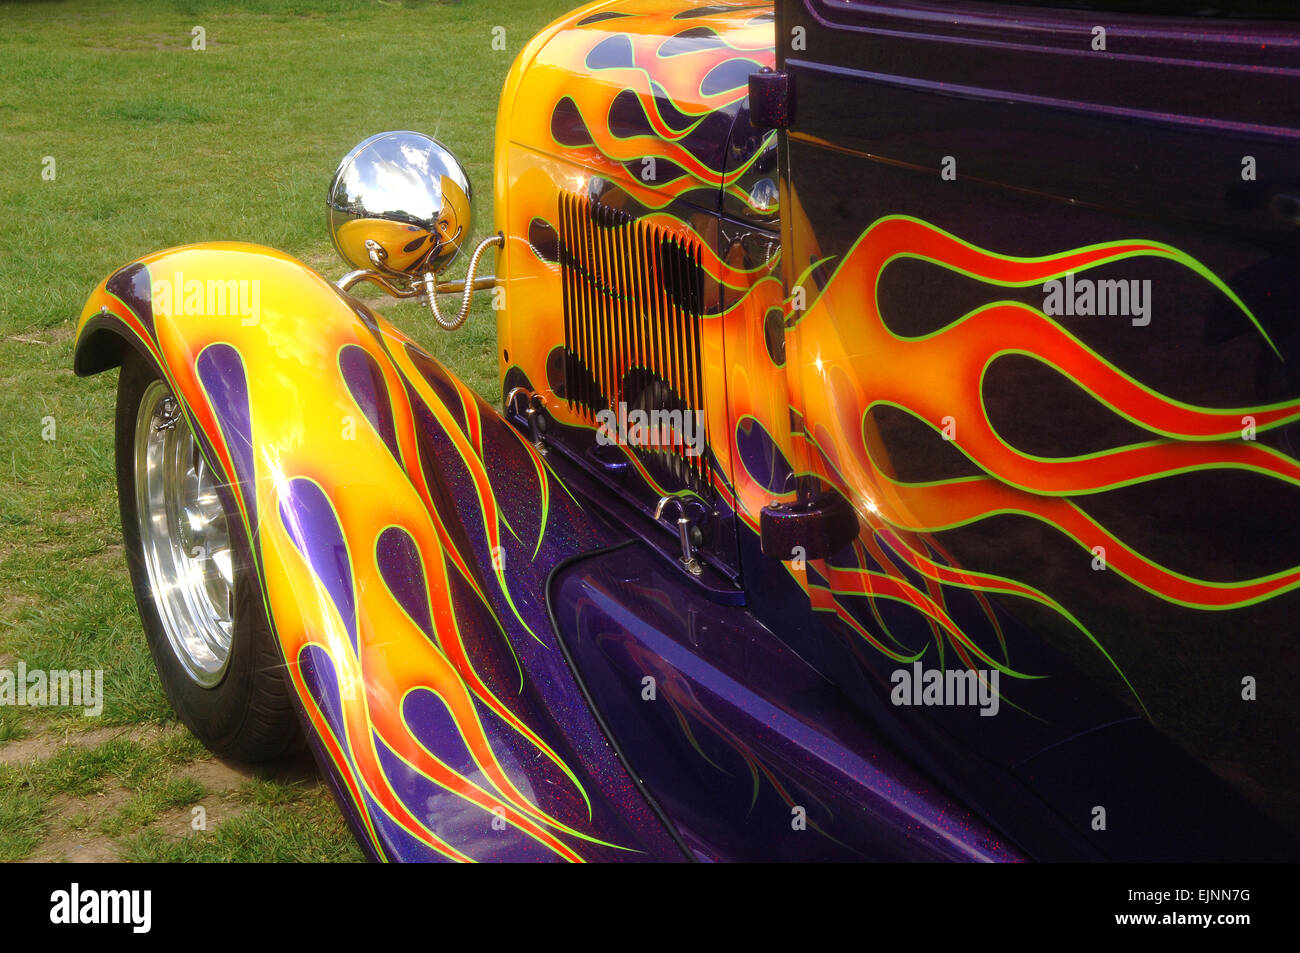 16 Flames - Old School ideas  flame art, pinstriping designs